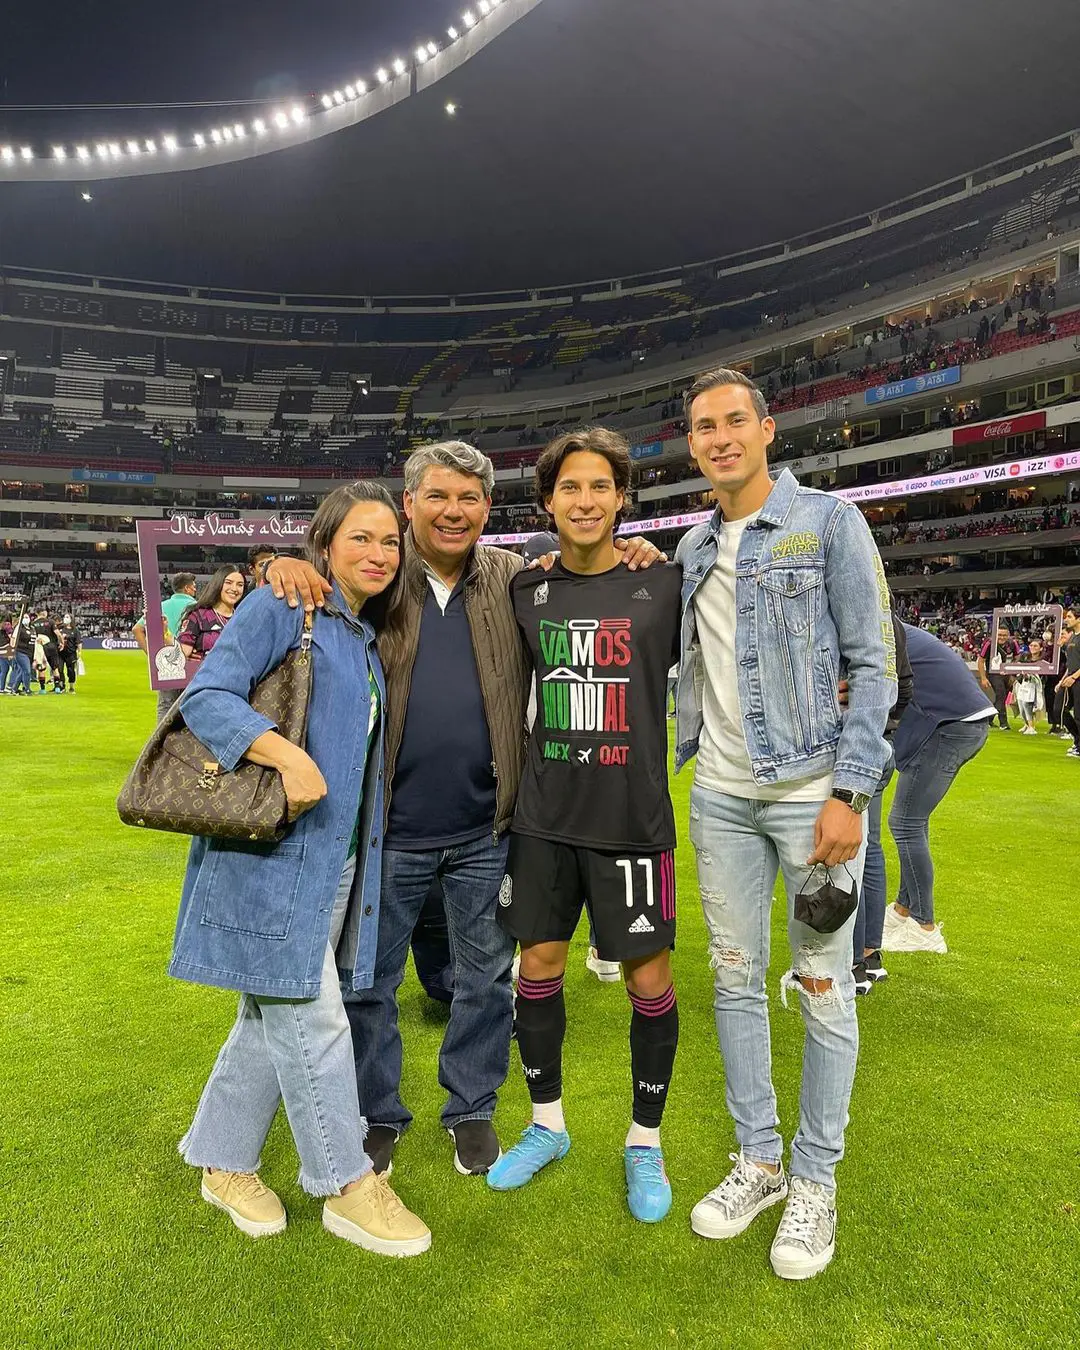 The Lainez family went to support the star of the family, Diego.